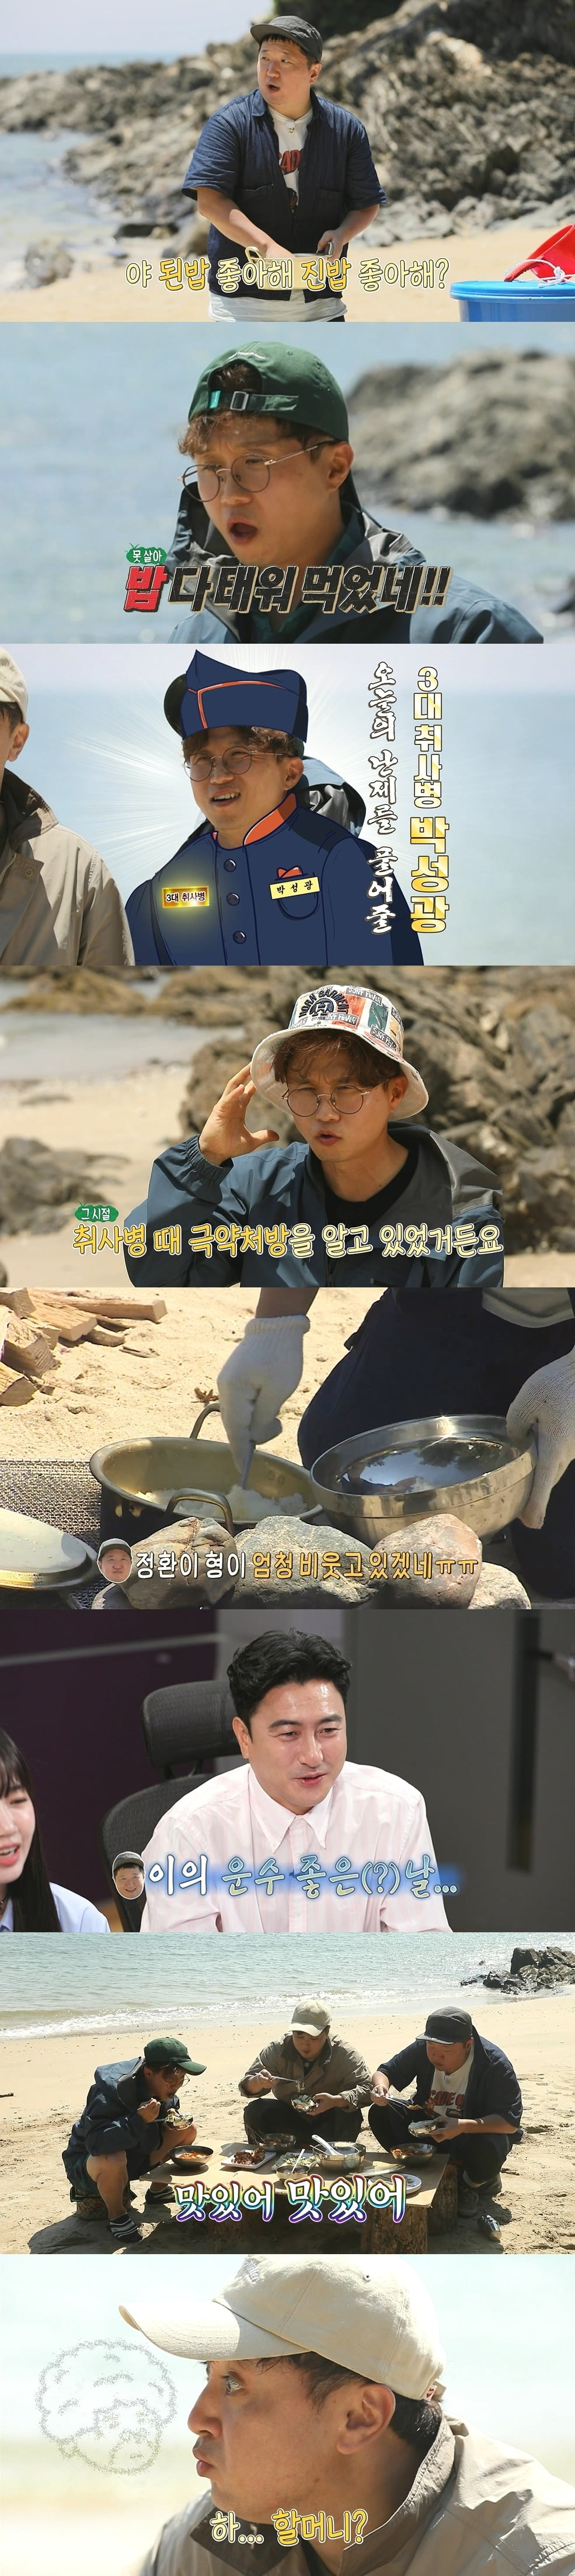 Jeong Hyeong-don, is he the wild goose father? Ahn Jung-hwan also laughed at his cooking skills